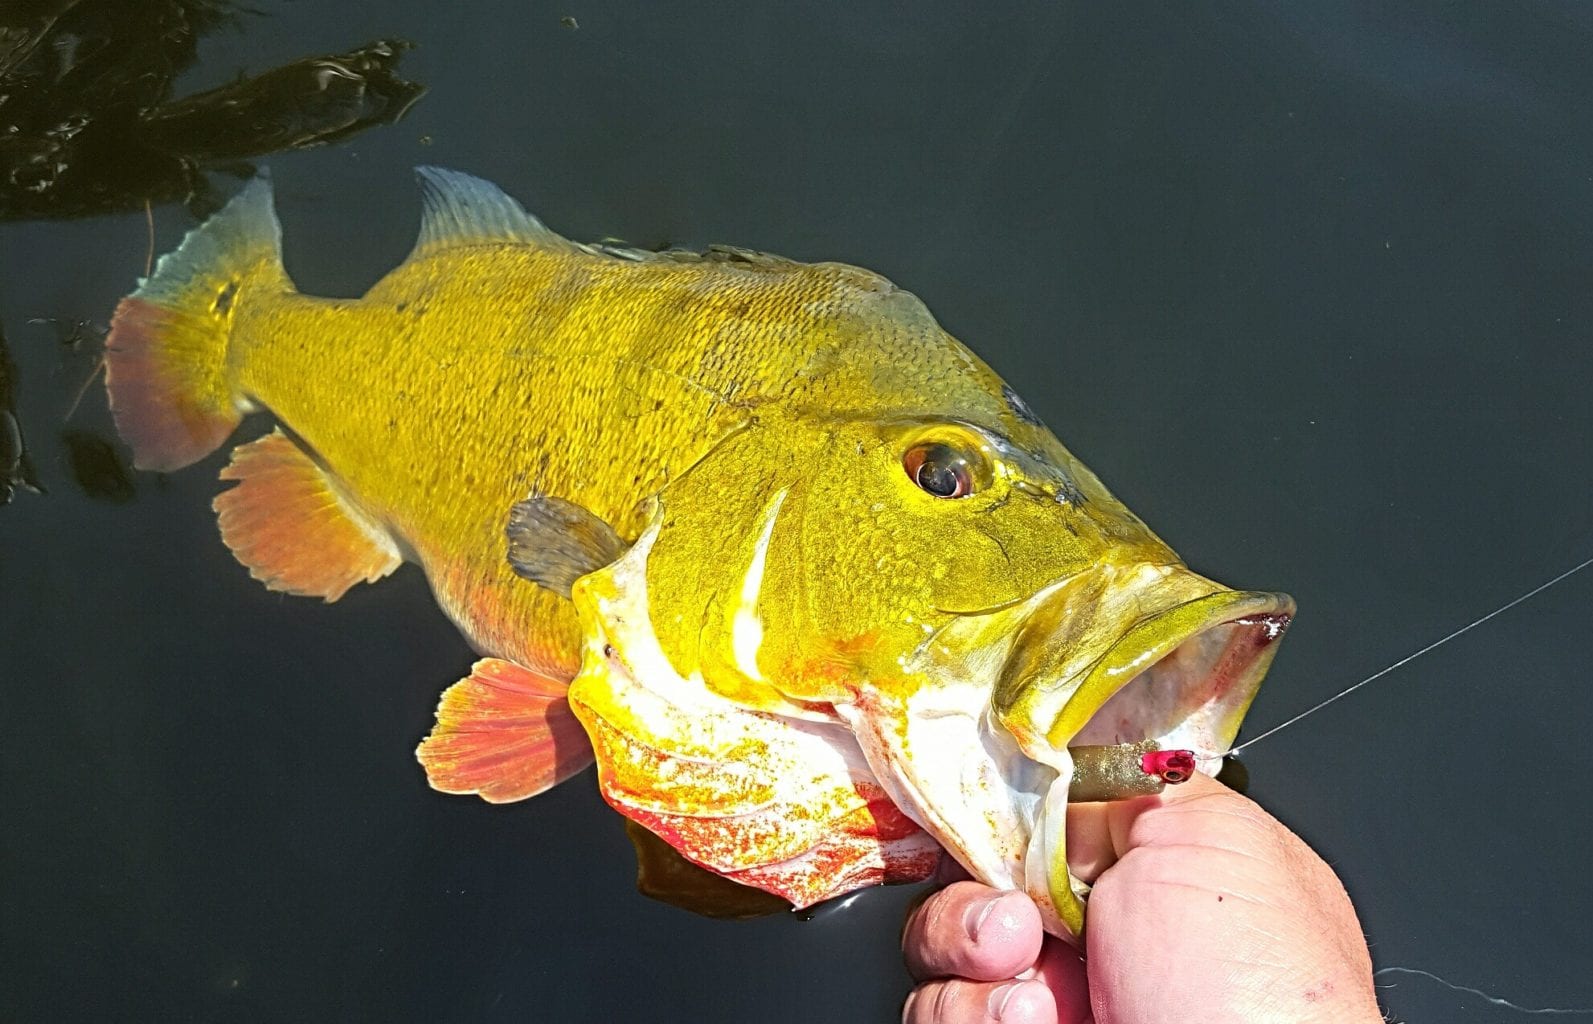 A florida peacock bass that was just caught